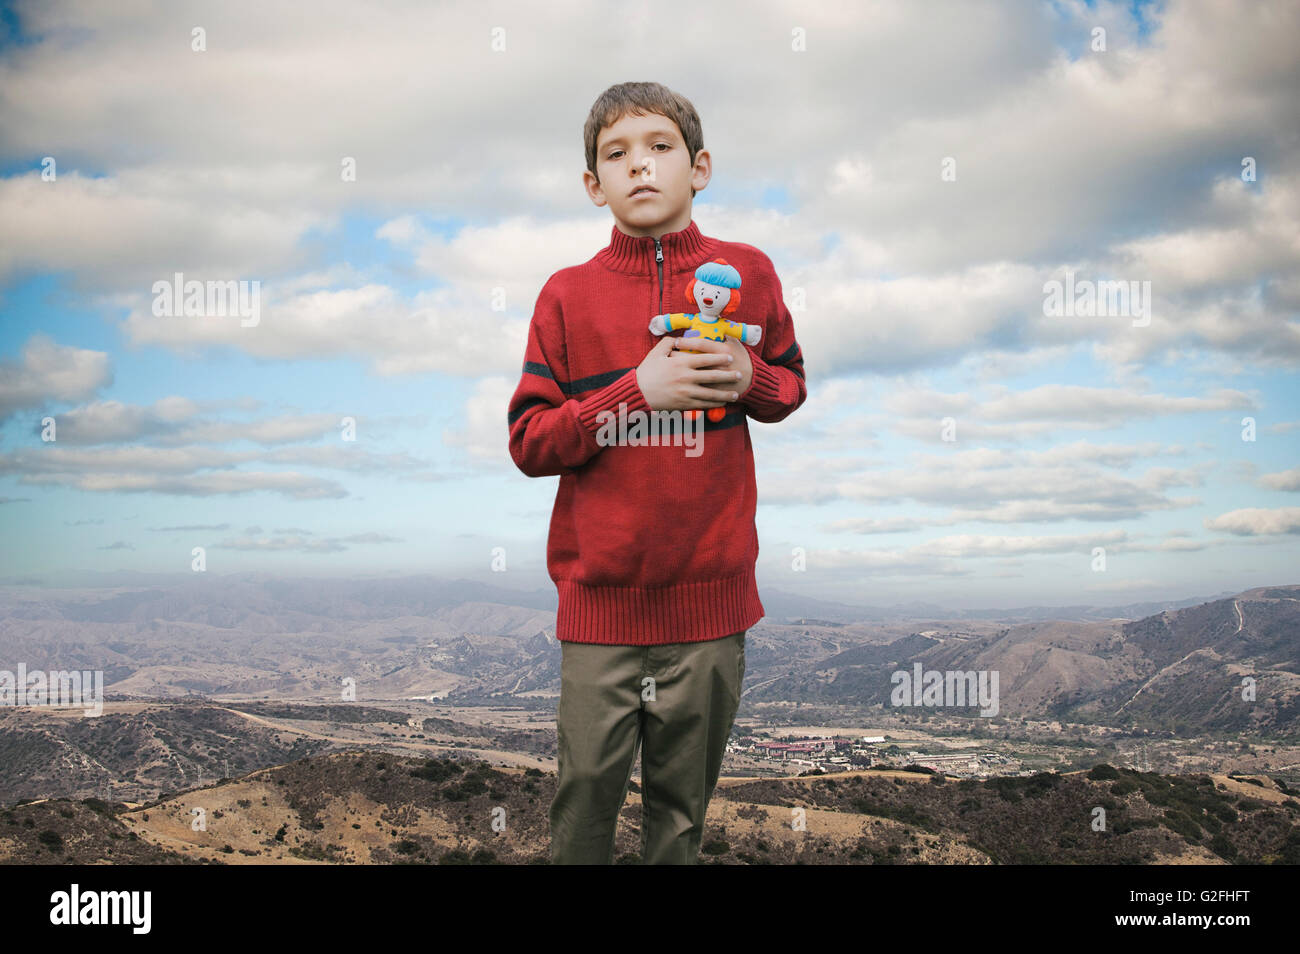 Young Boy Holding Stuffed Doll Against Mountain Landscape Stock Photo